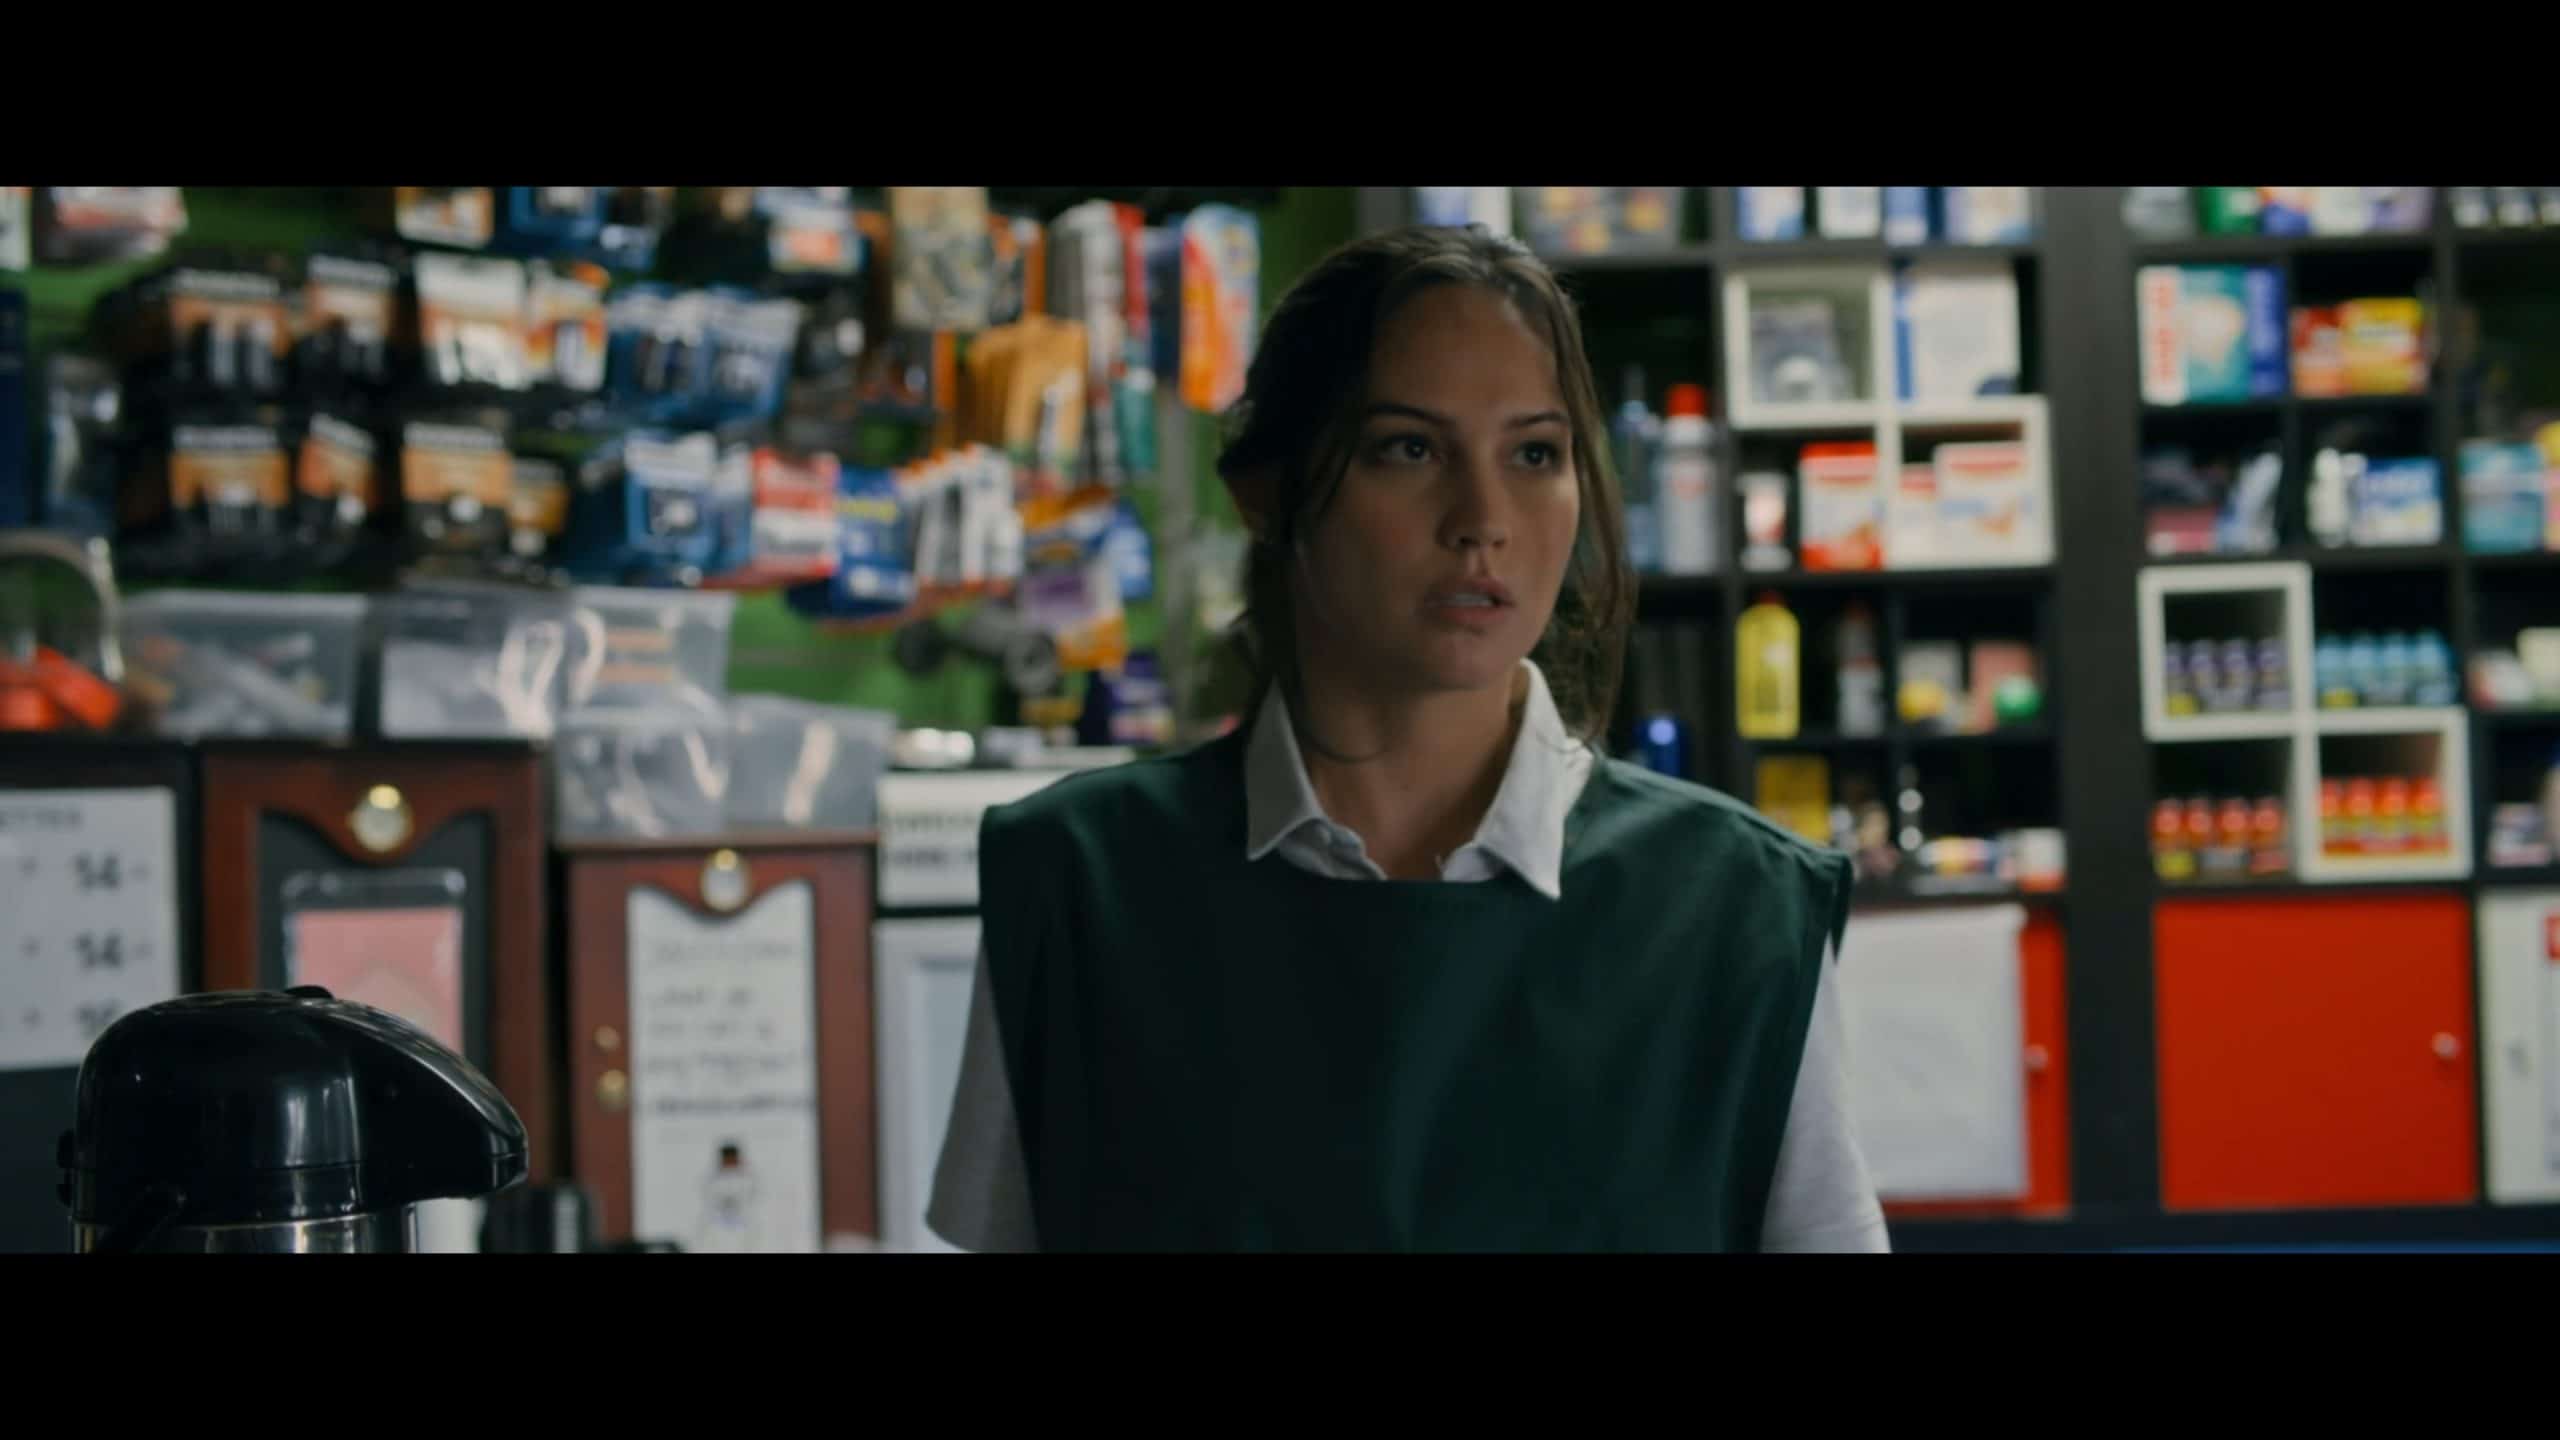 Rachelle Goulding as Lily as a store clerk